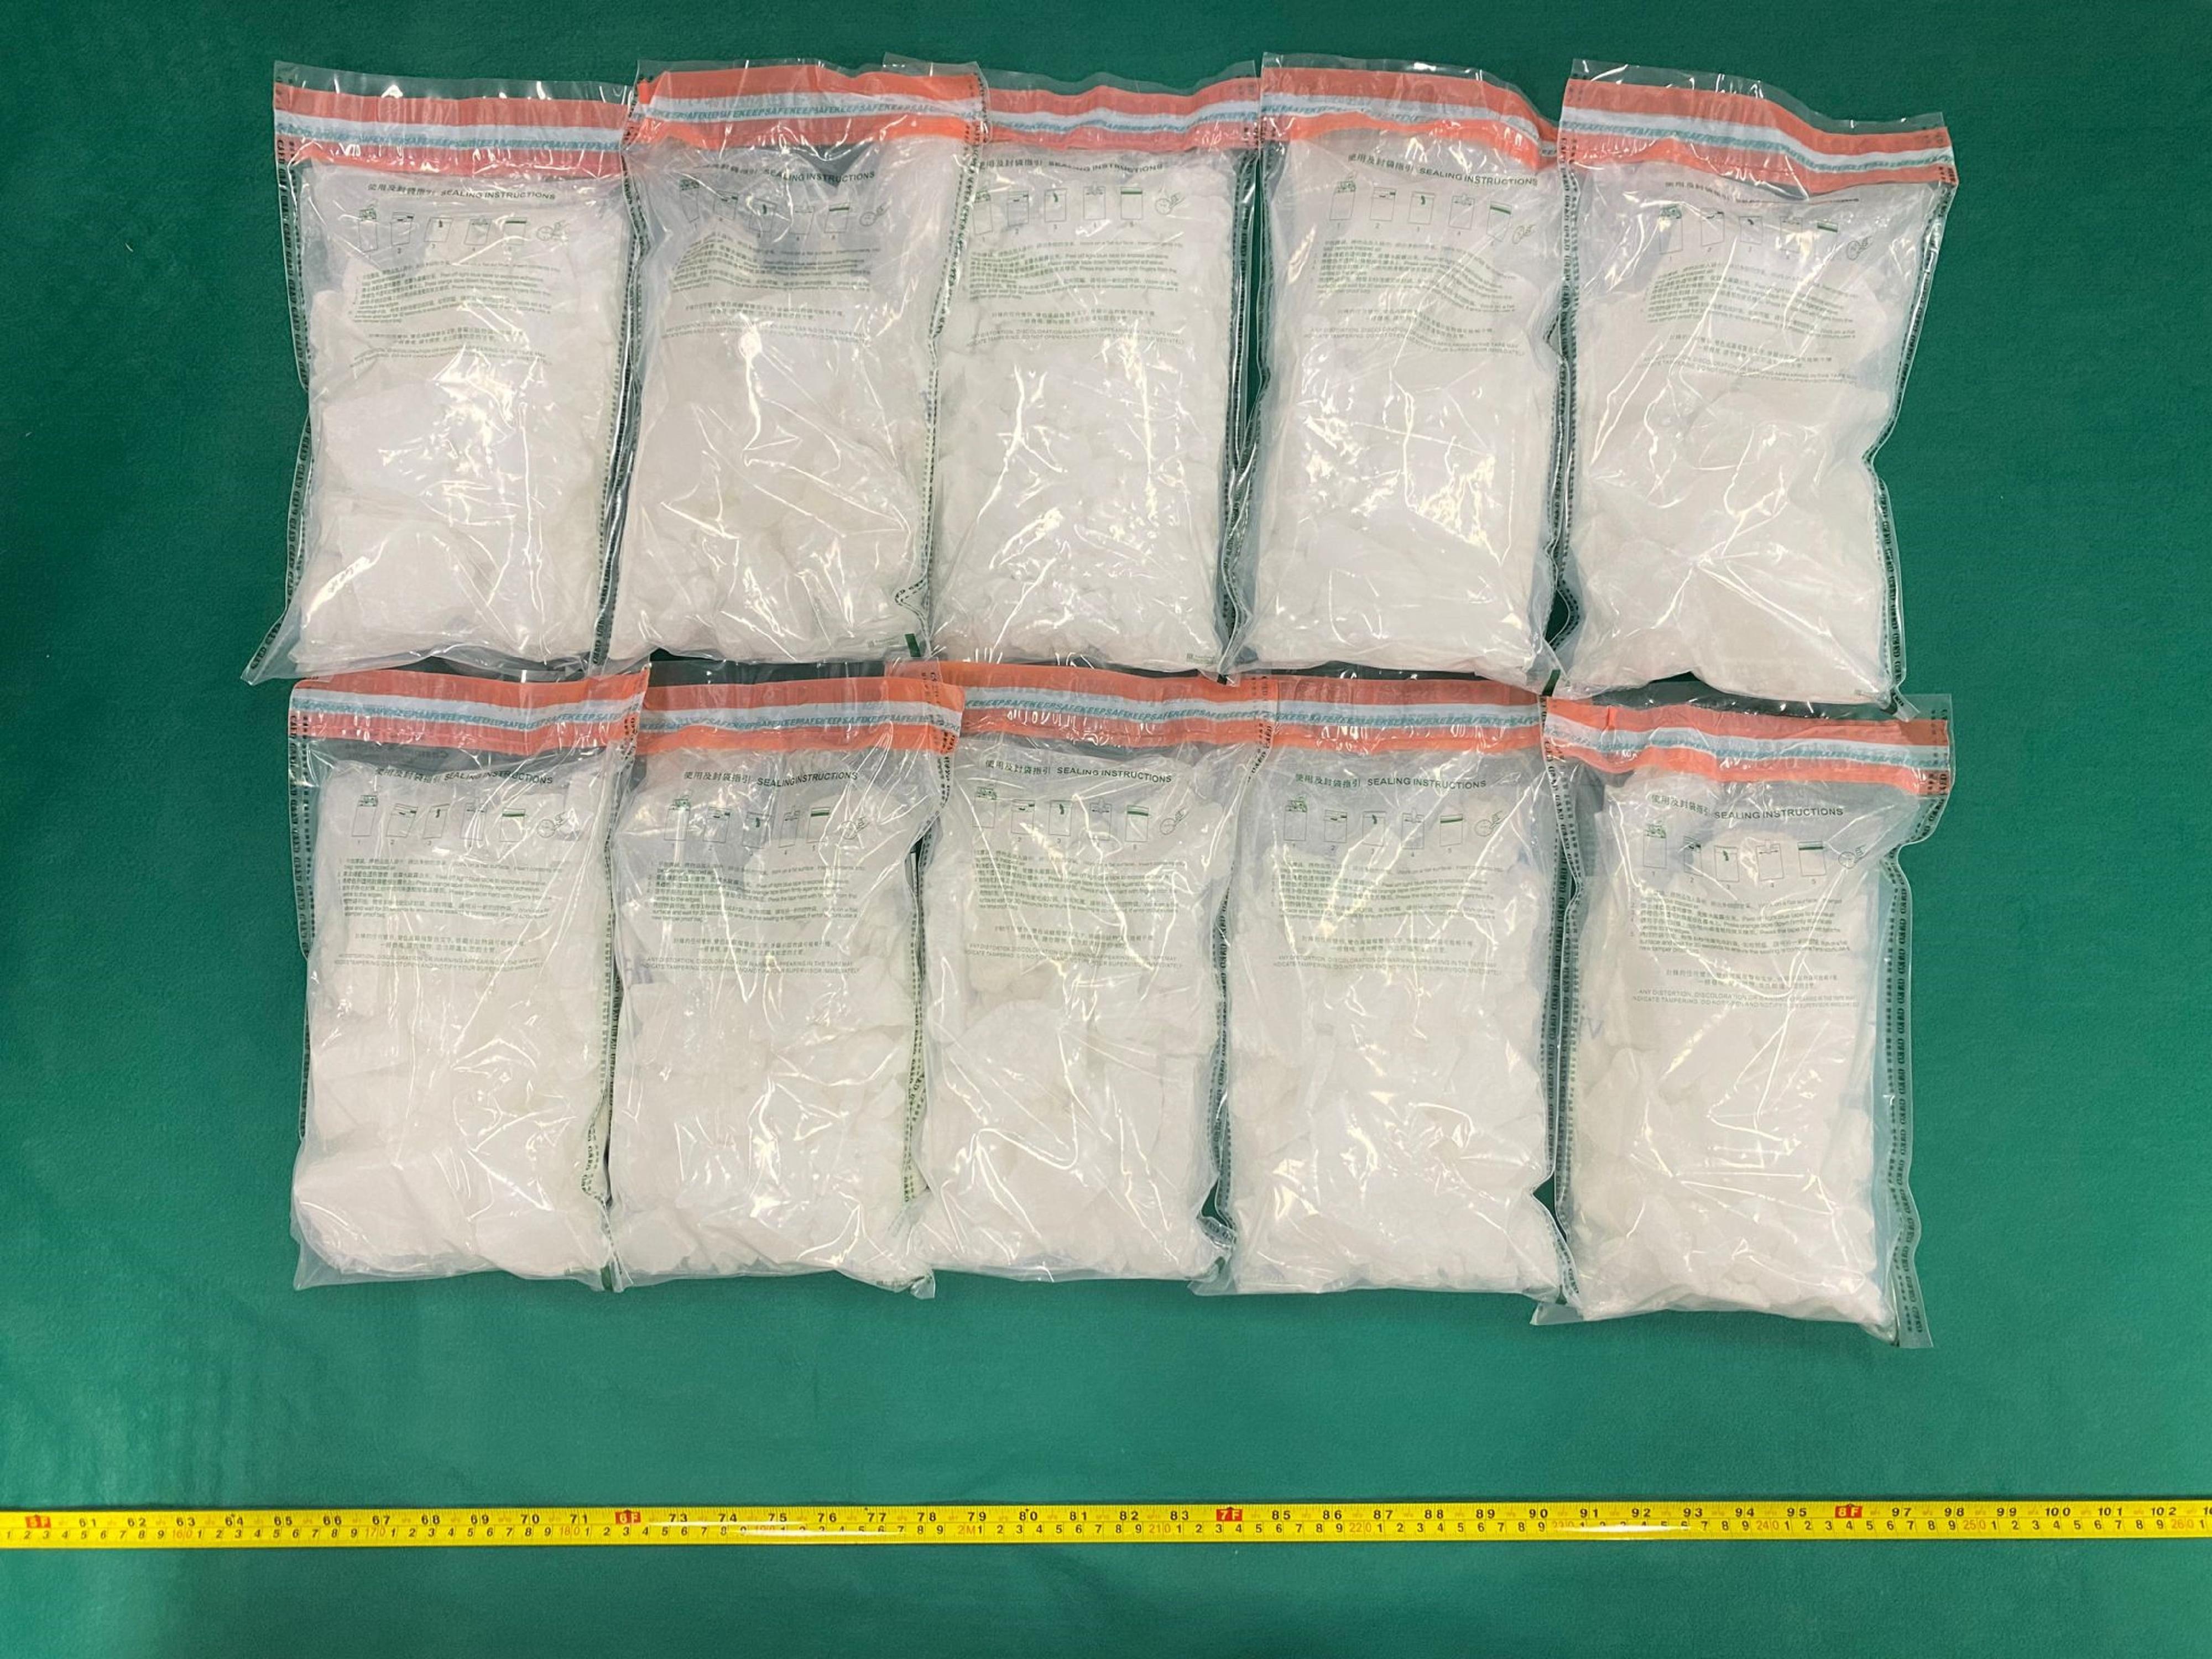 Hong Kong Customs seized about 10 kilograms of suspected ketamine with an estimated market value of about $4.3 million at Hong Kong International Airport on May 2. Photo shows the suspected ketamine seized.